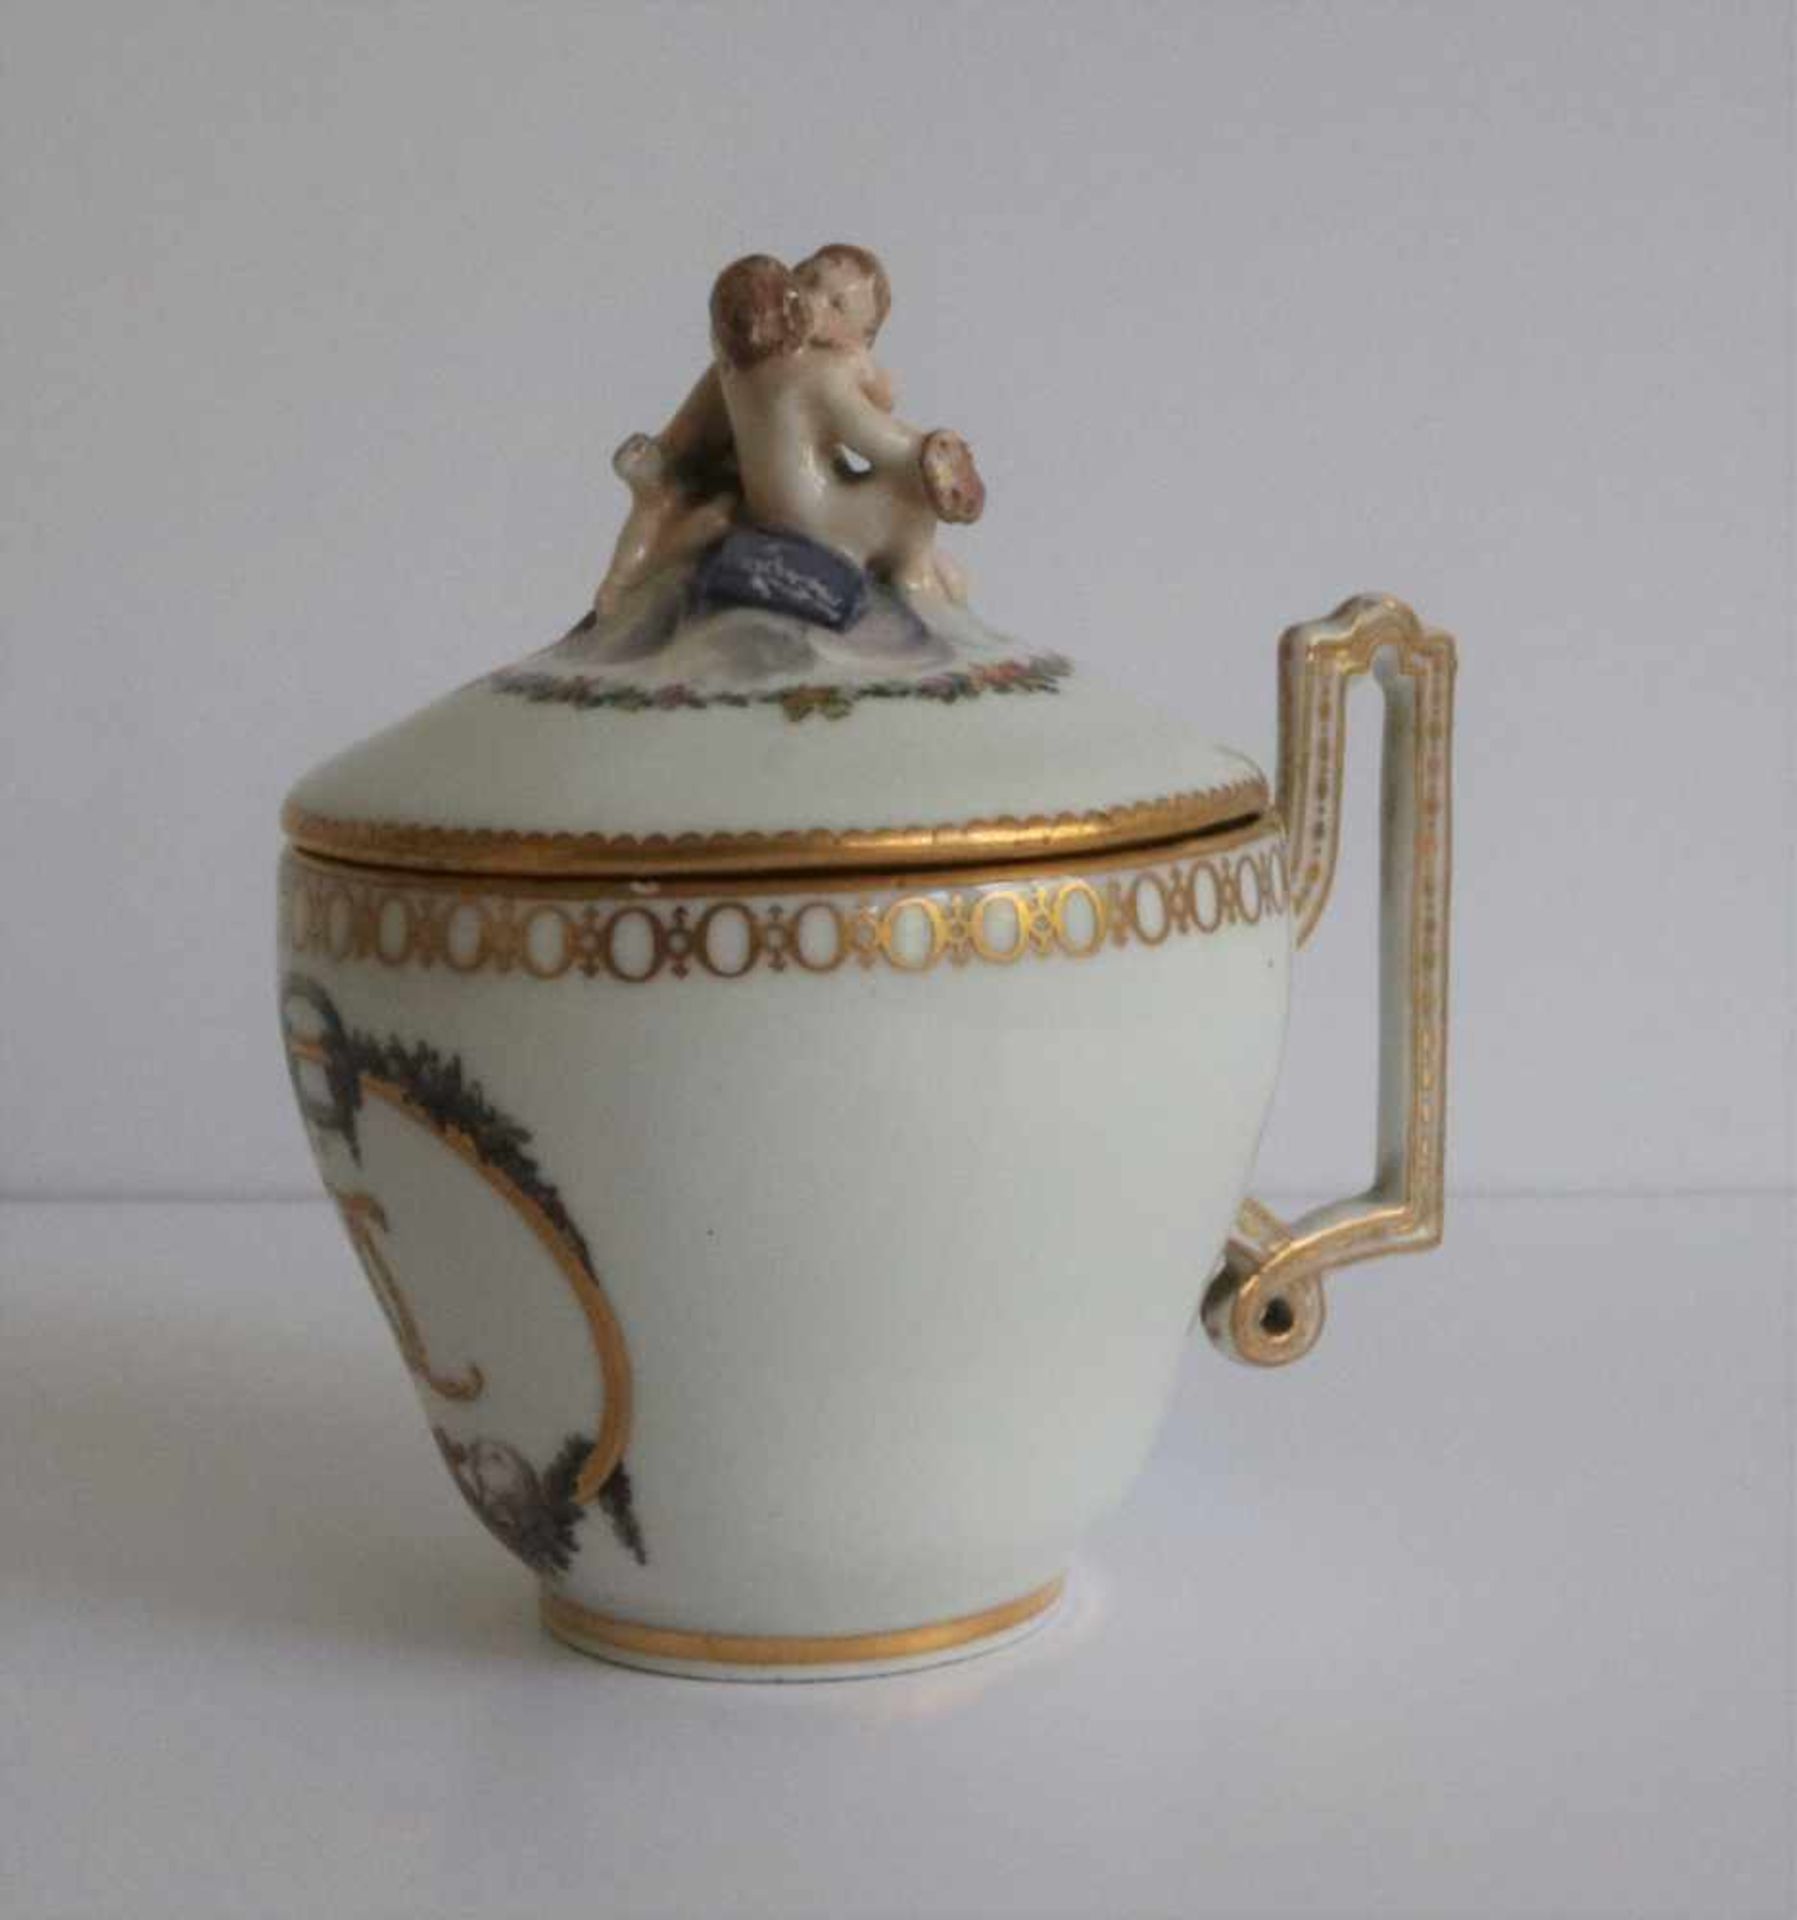 Sèvres breakfast cup 18th century (French) H 10 B 9 cm